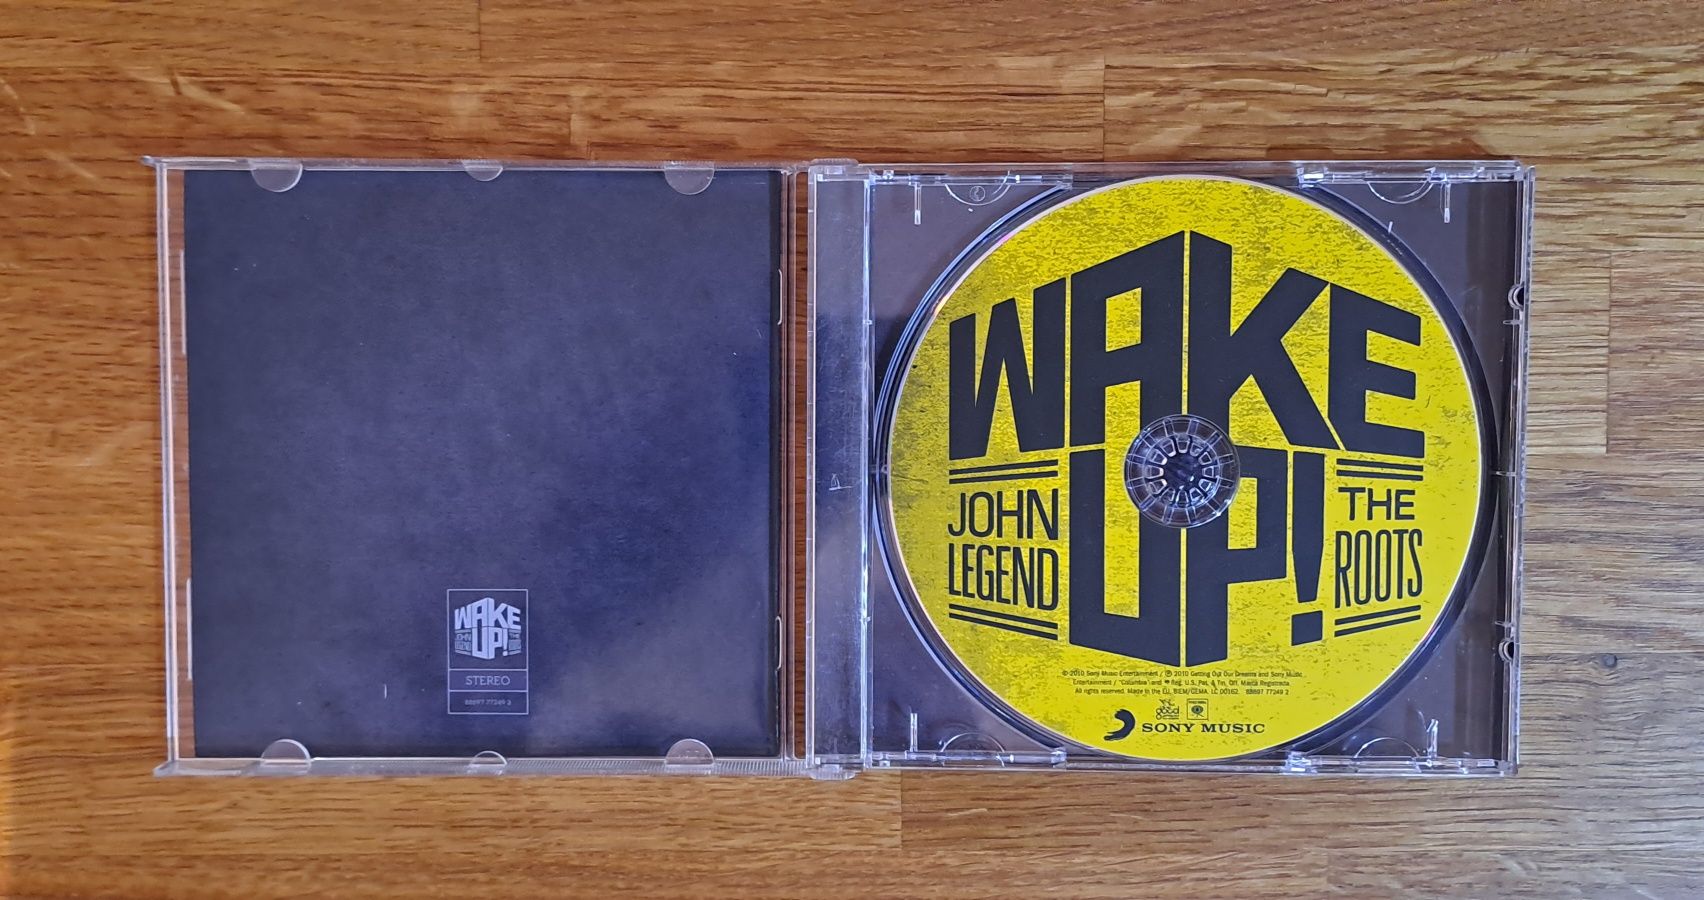 John Legend & The Roots Wake Up